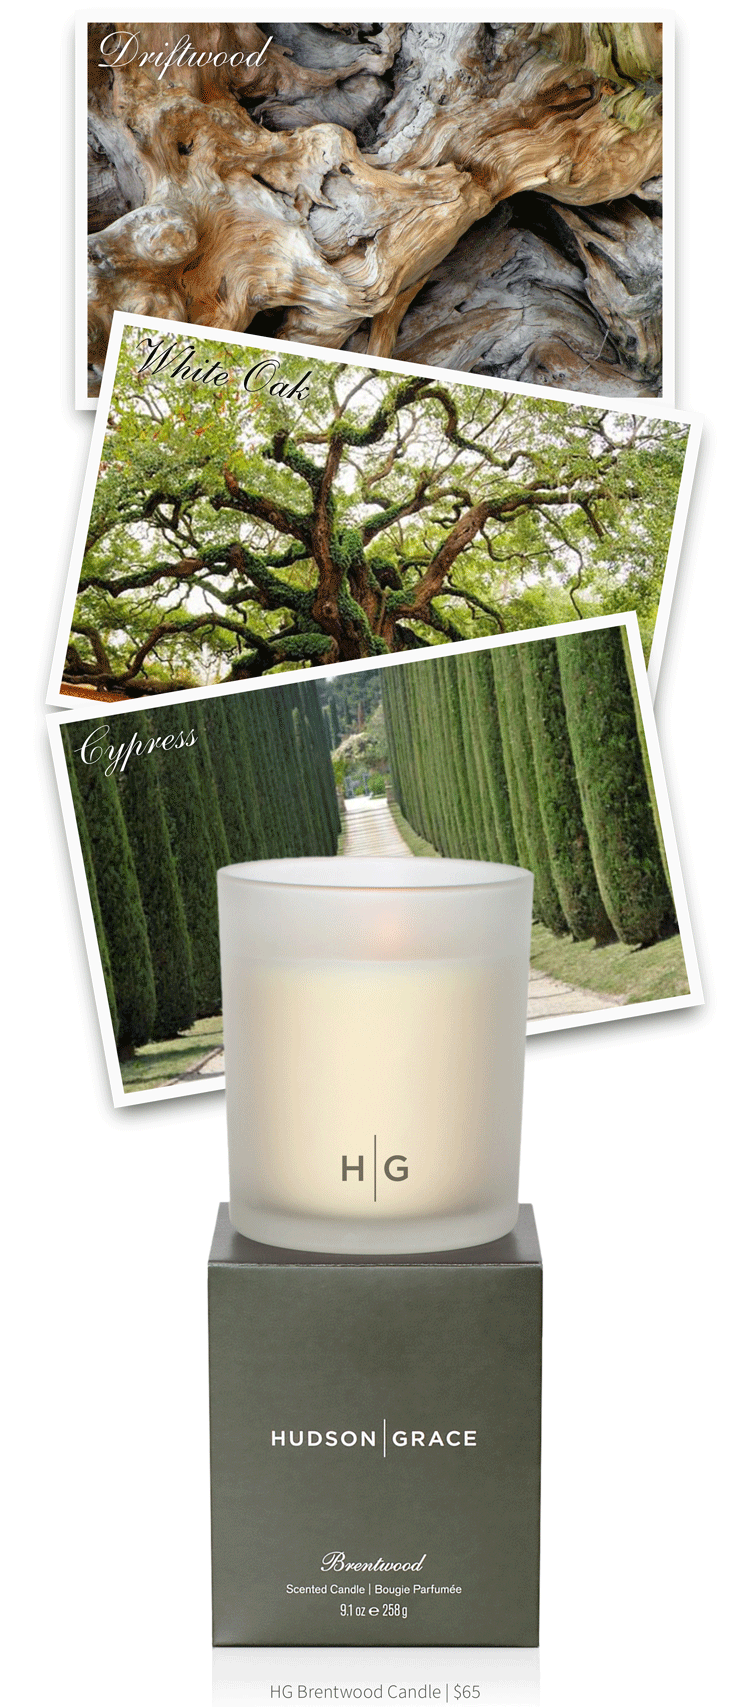 HG Brentwood Candle | $65